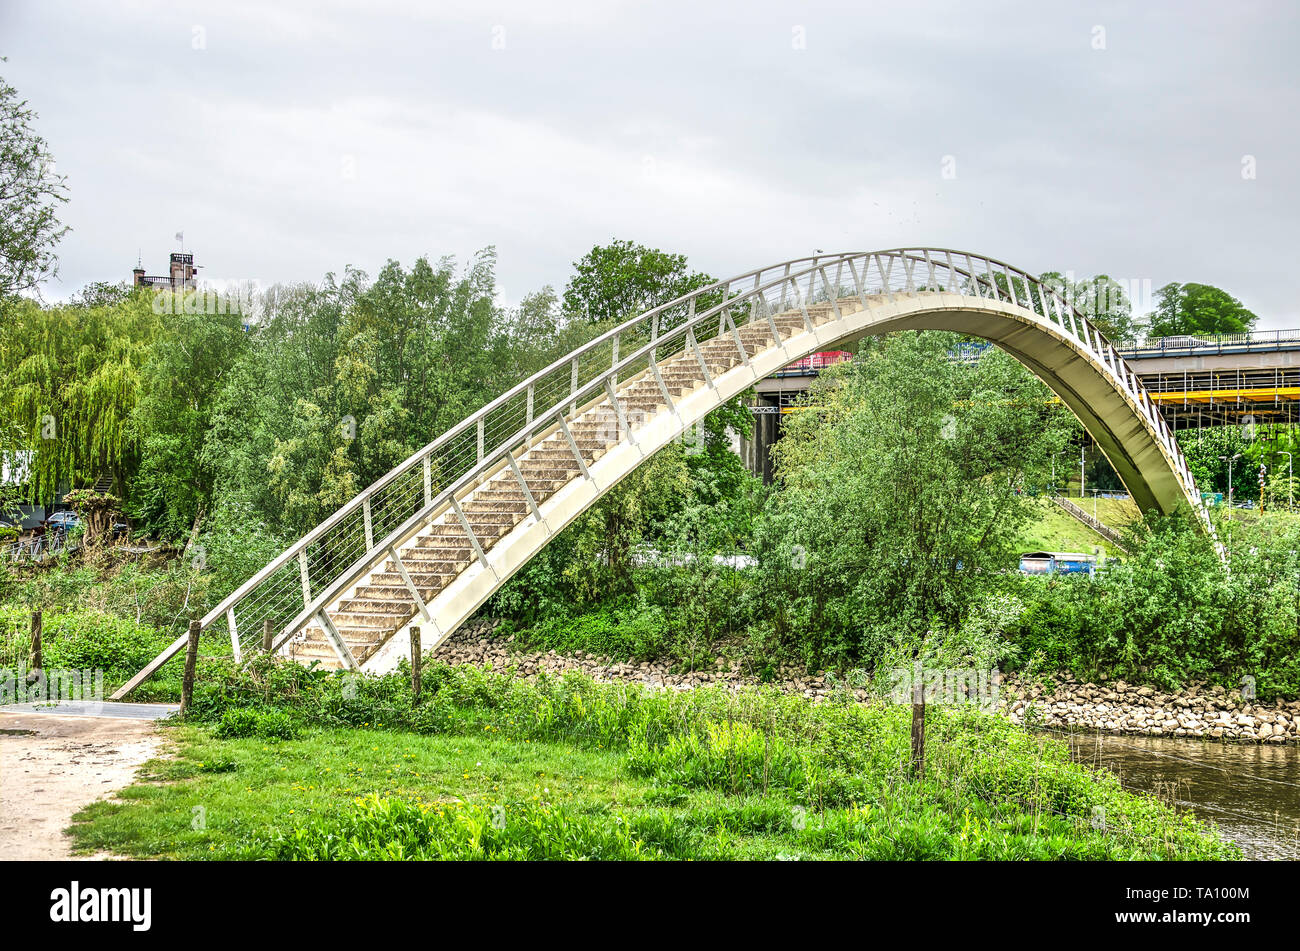 Nijmegen, The Netherlands, April 25, 2019: the Ooypoort pedestrian bridge, made of composite material, connects the city with Ooijpolder nature reserv Stock Photo